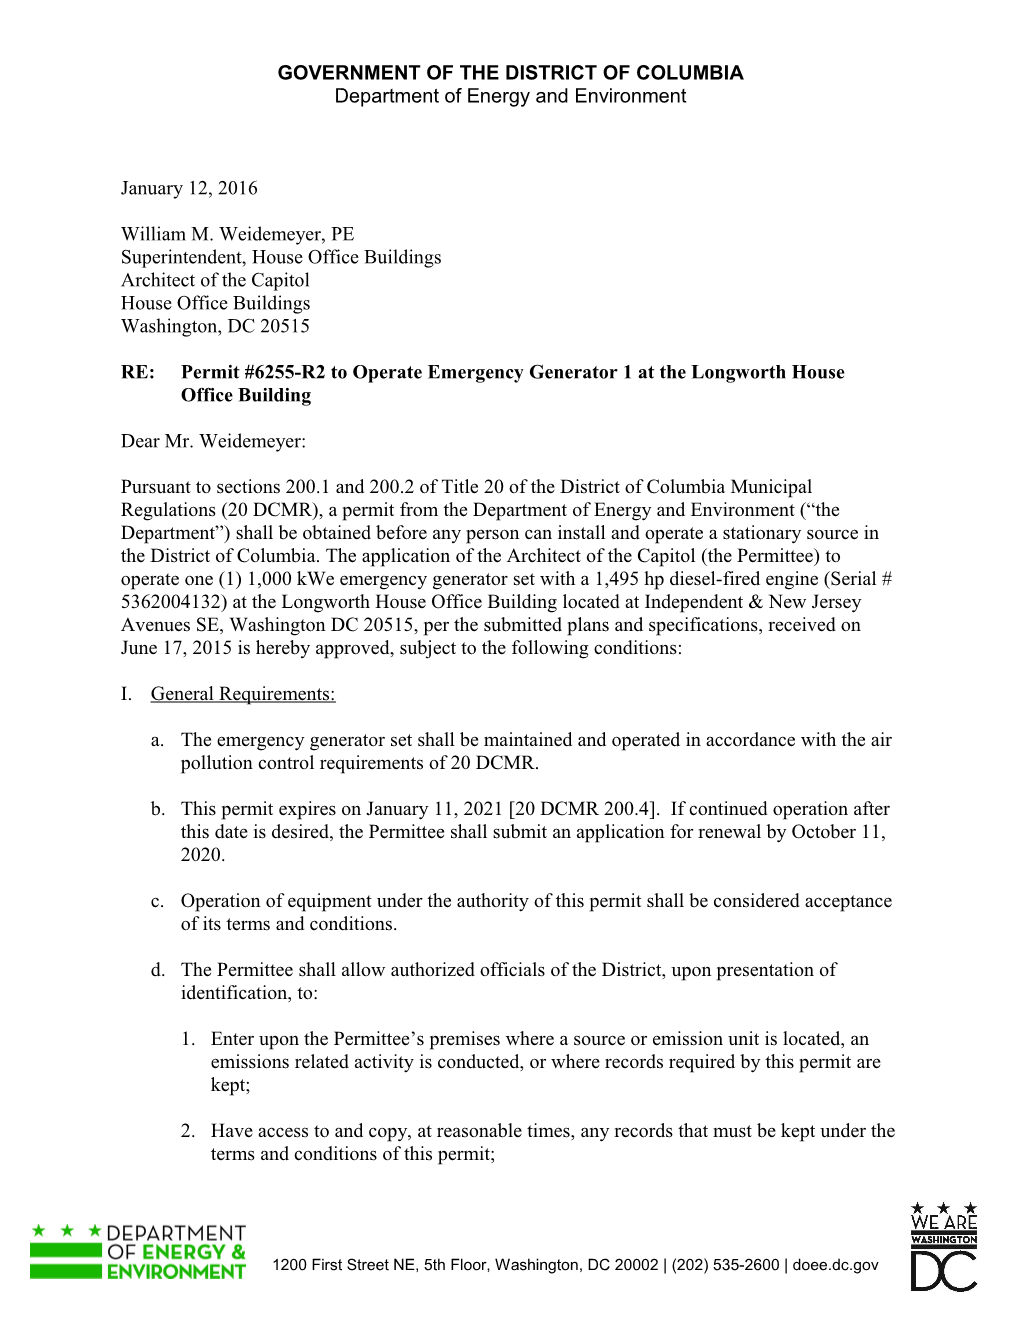 Permit #6255-R2 to Operate Emergency Generator1 at the Longworthhouse Office Building